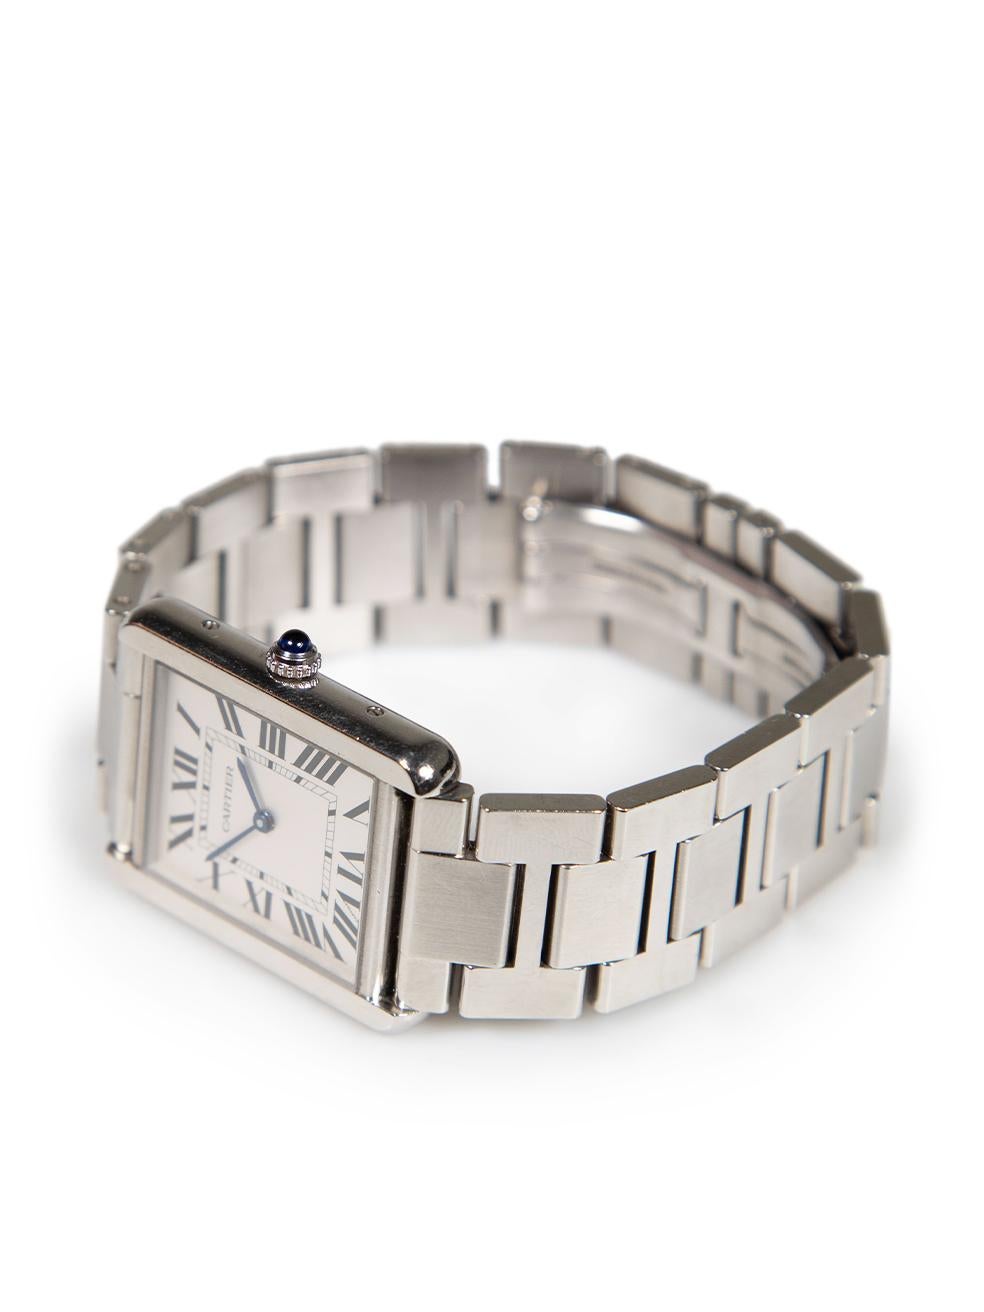 Cartier Silver Stainless Steel Tank Solo Watch For Sale 1